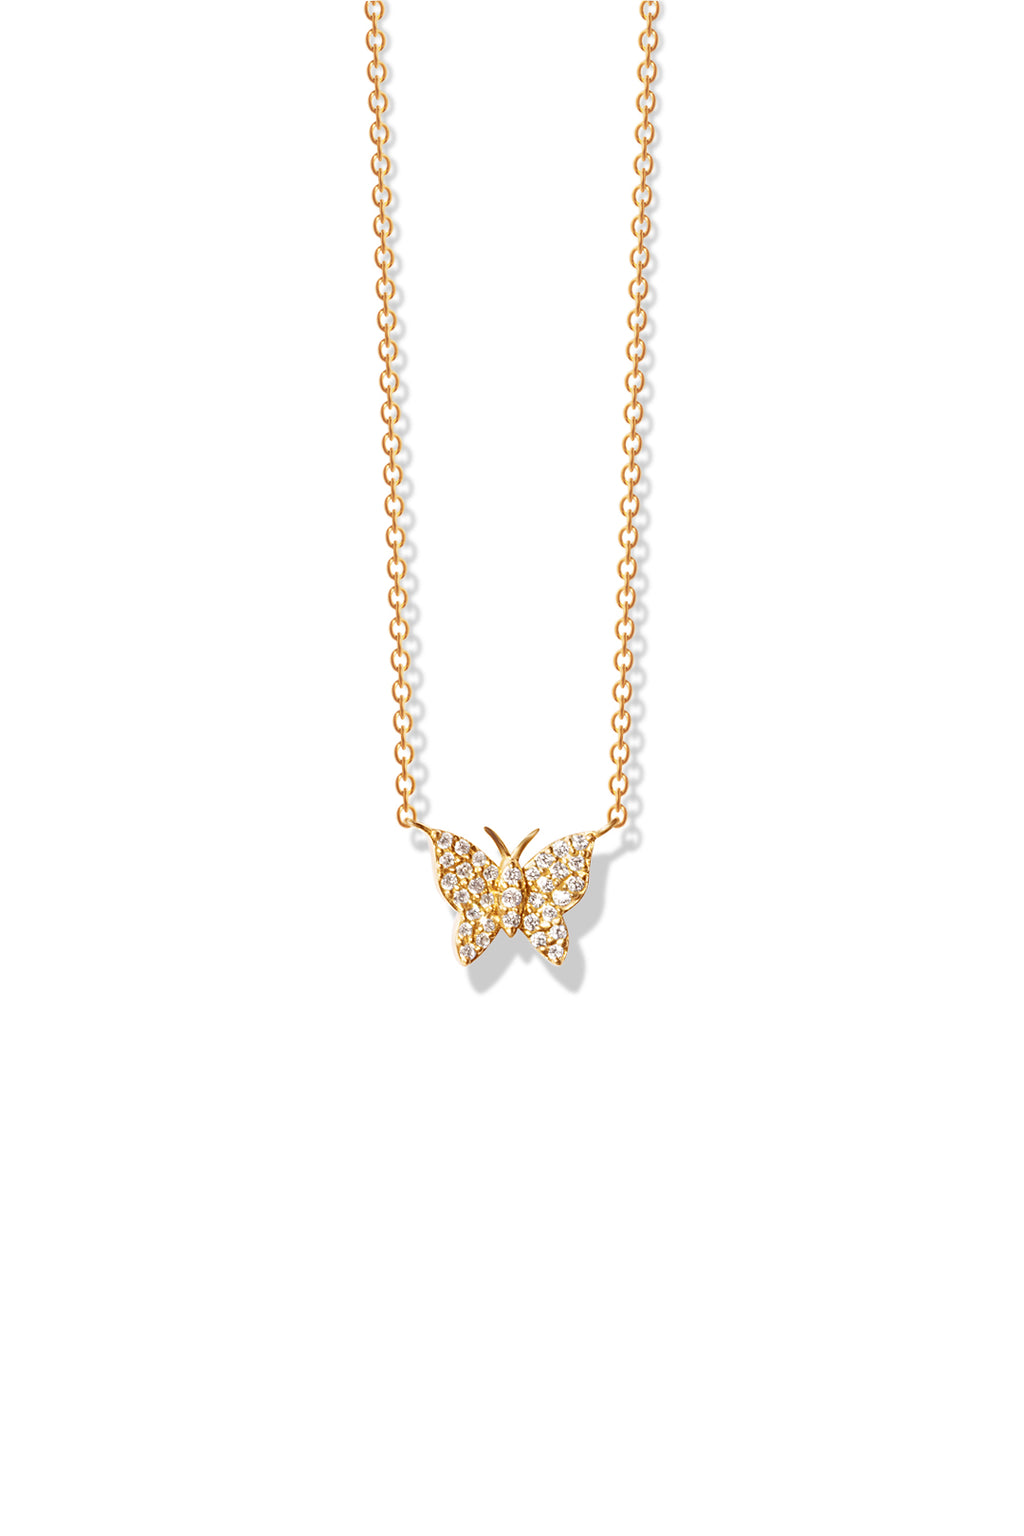 A delicate 14k yellow gold necklace featuring a butterfly pendant encrusted with diamonds. 